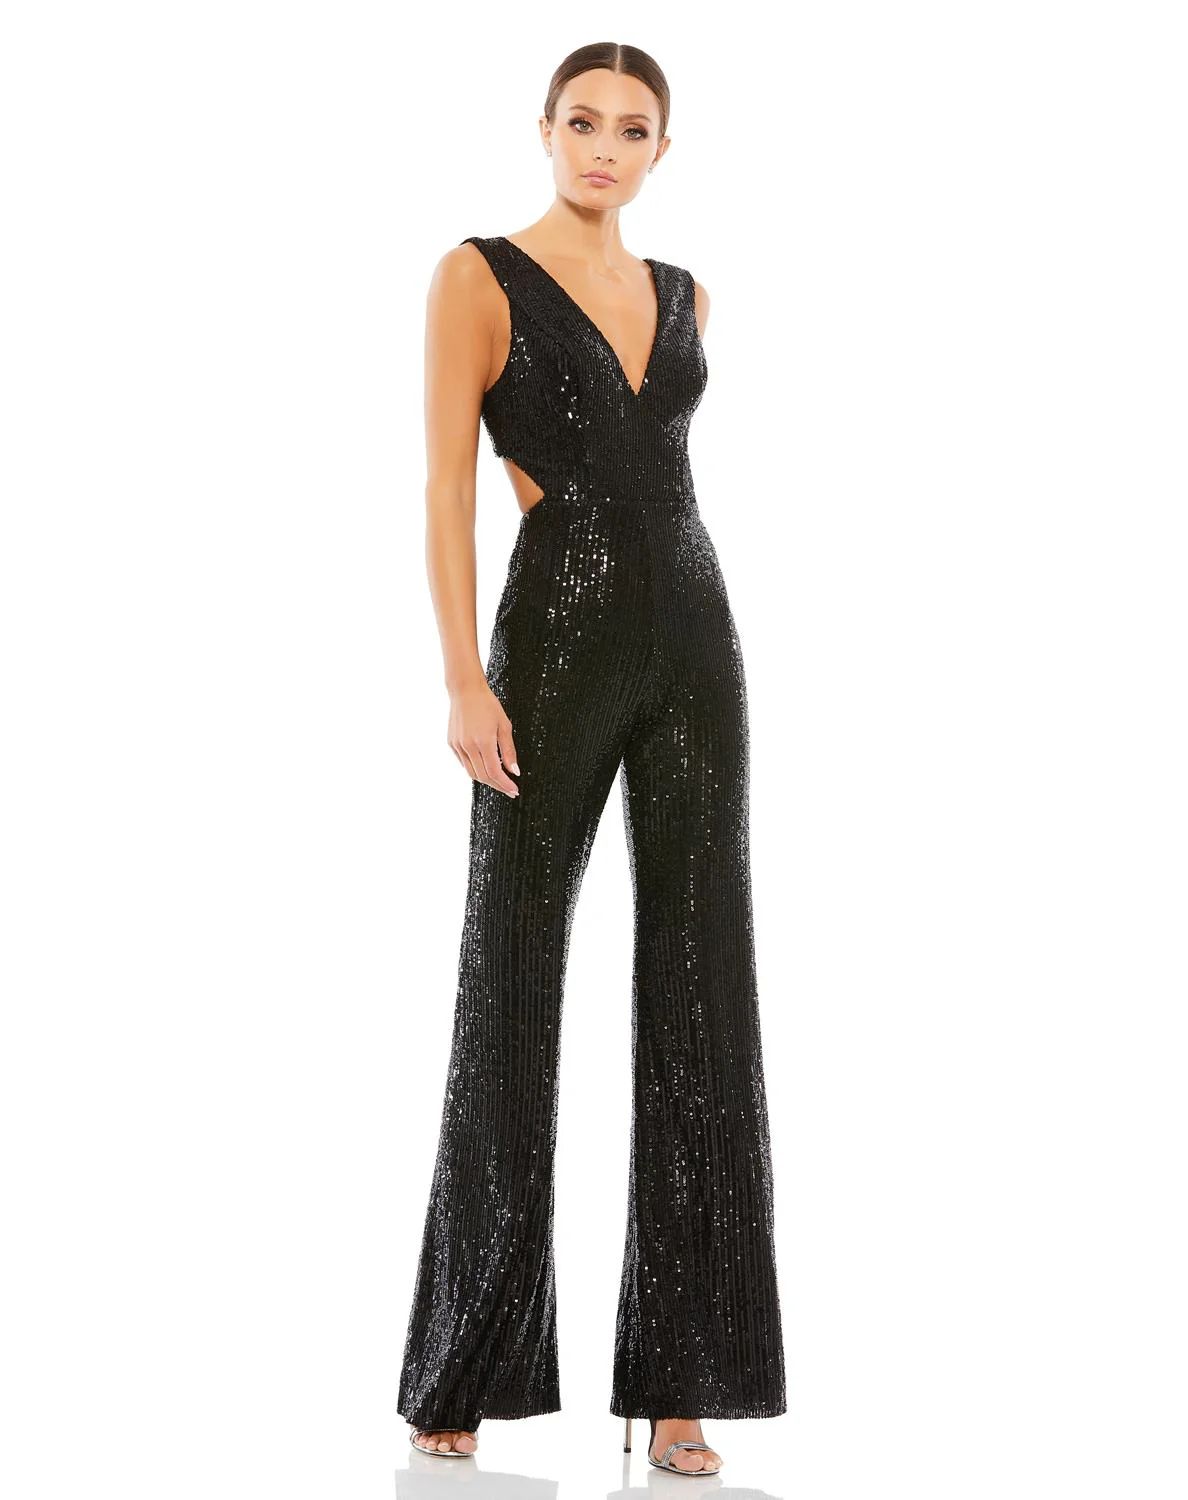 Ieena for Mac Duggal Women's Multi Color Sequined V-Neck Cut Out Jumpsuit Dress in Black 14 Lord & T | Lord & Taylor